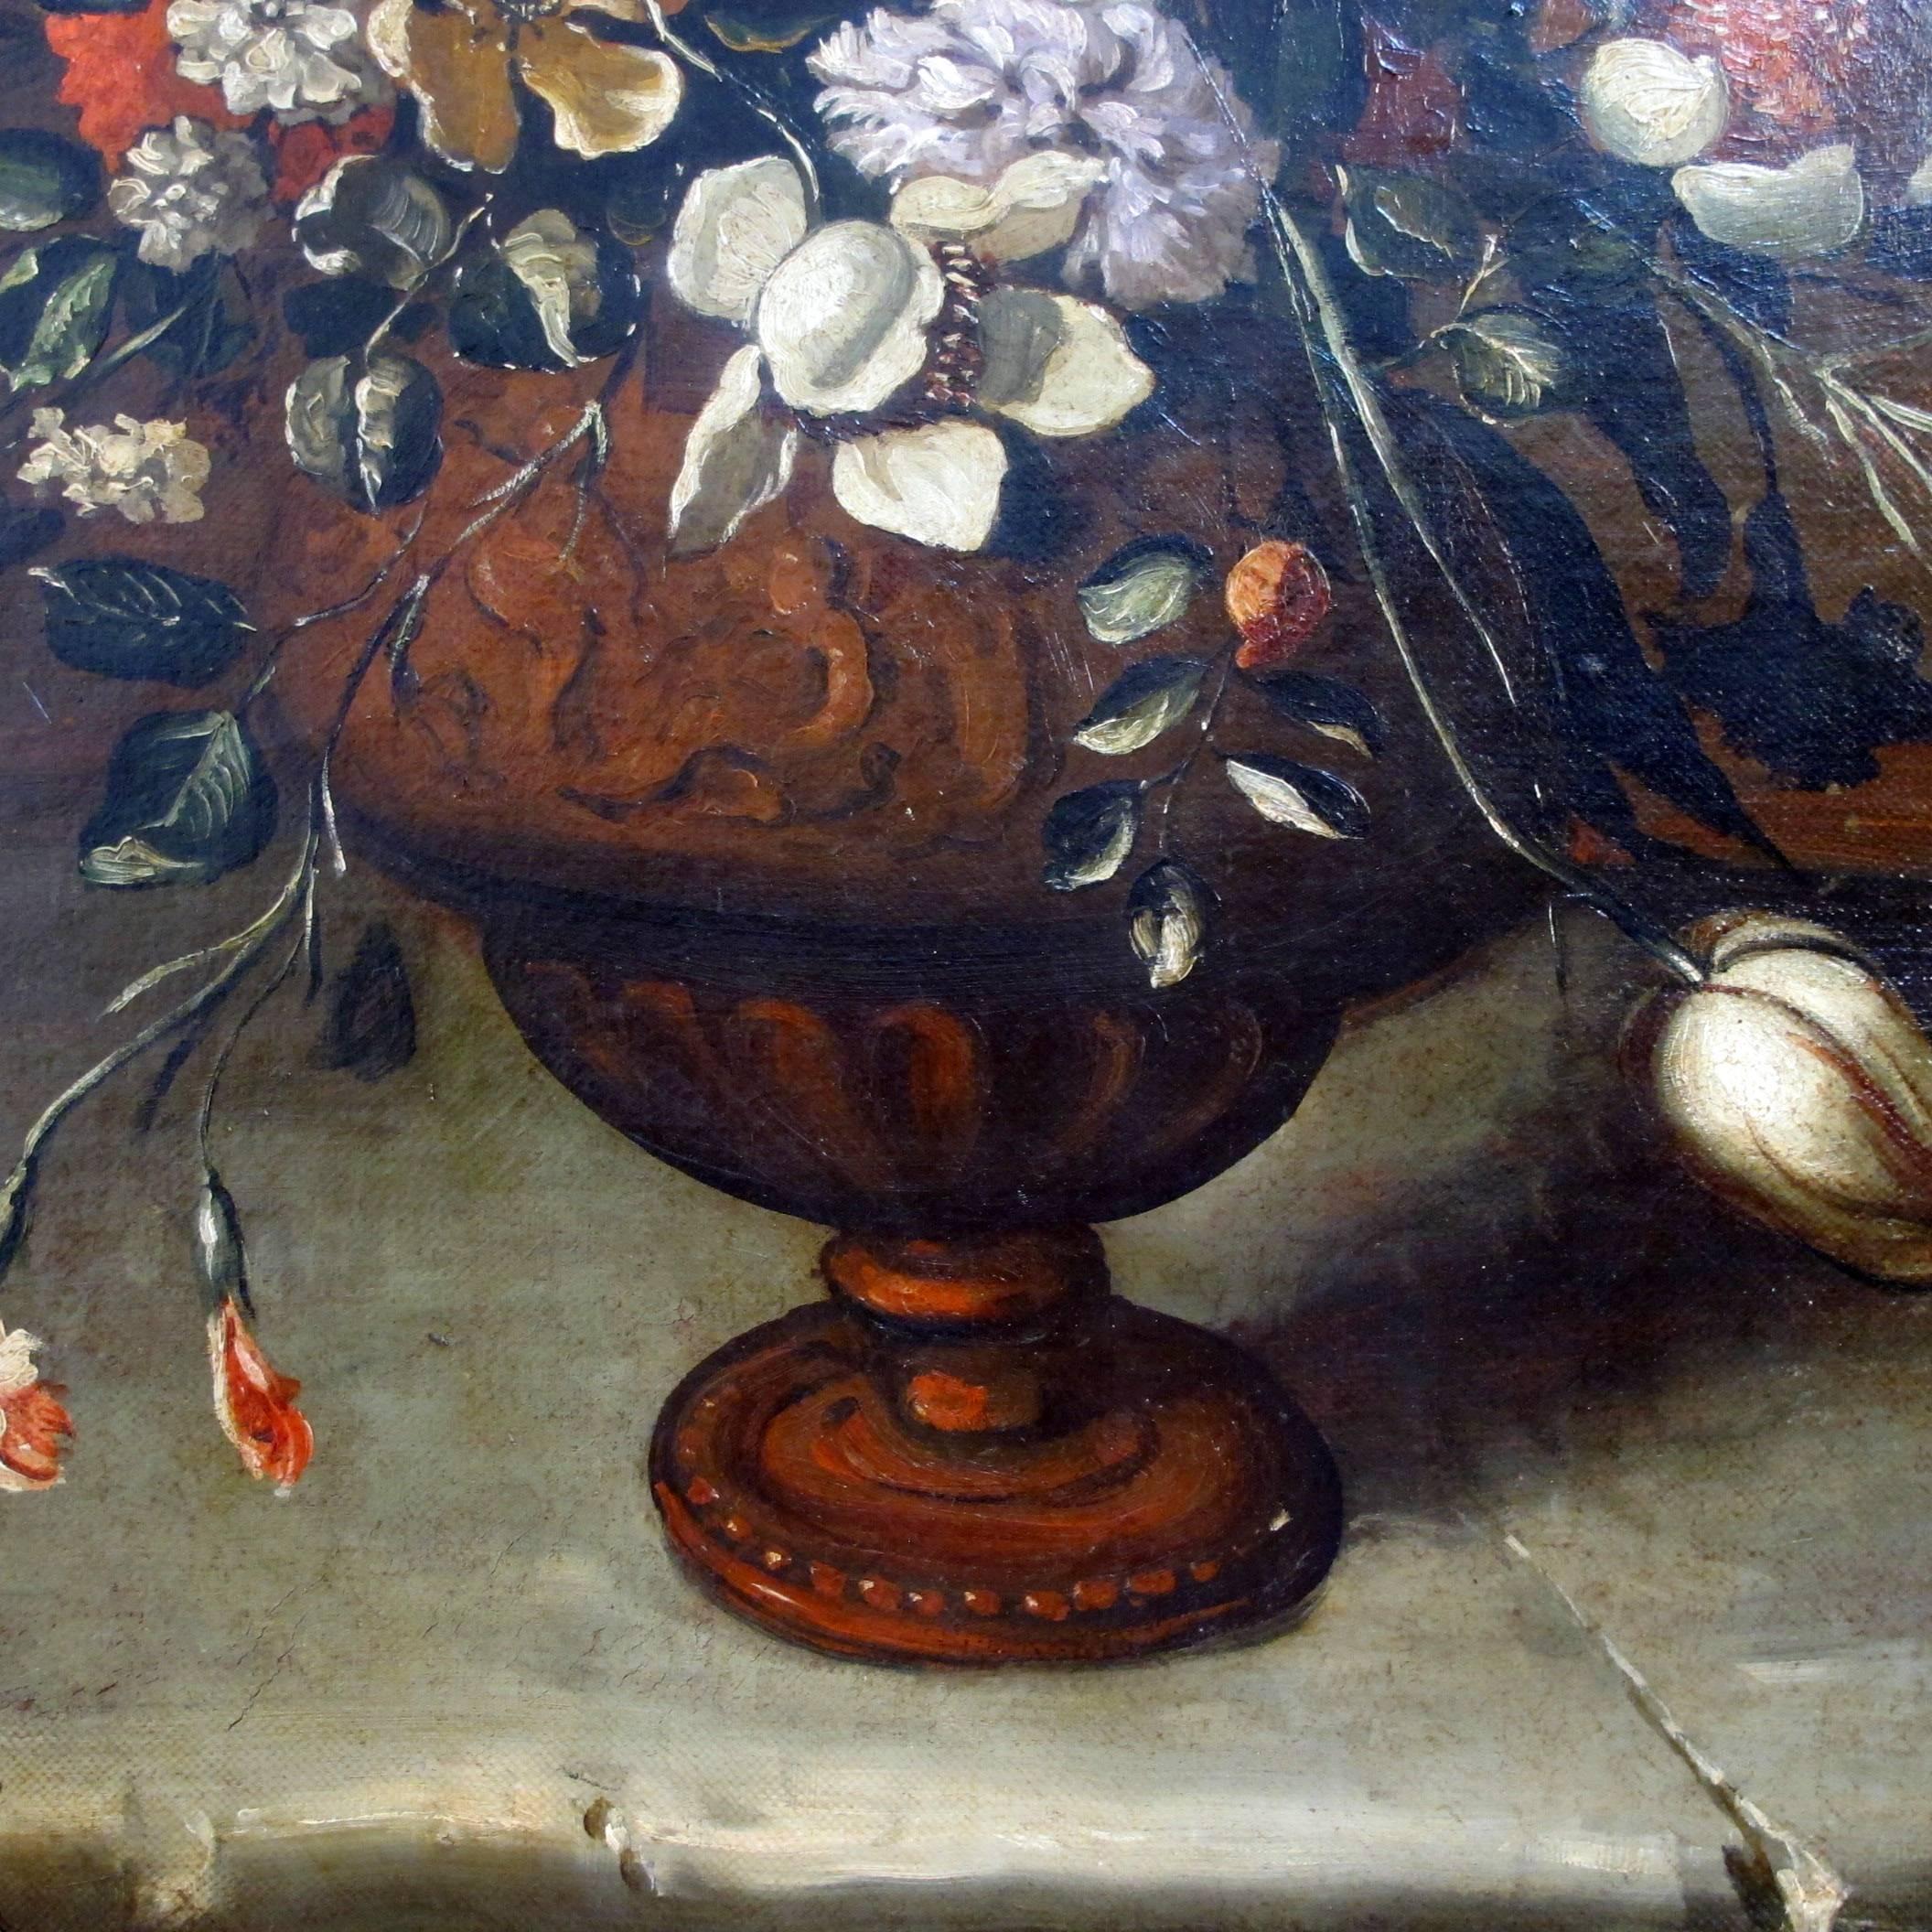 Painted Hexagonal Floral Still Life 19th Century